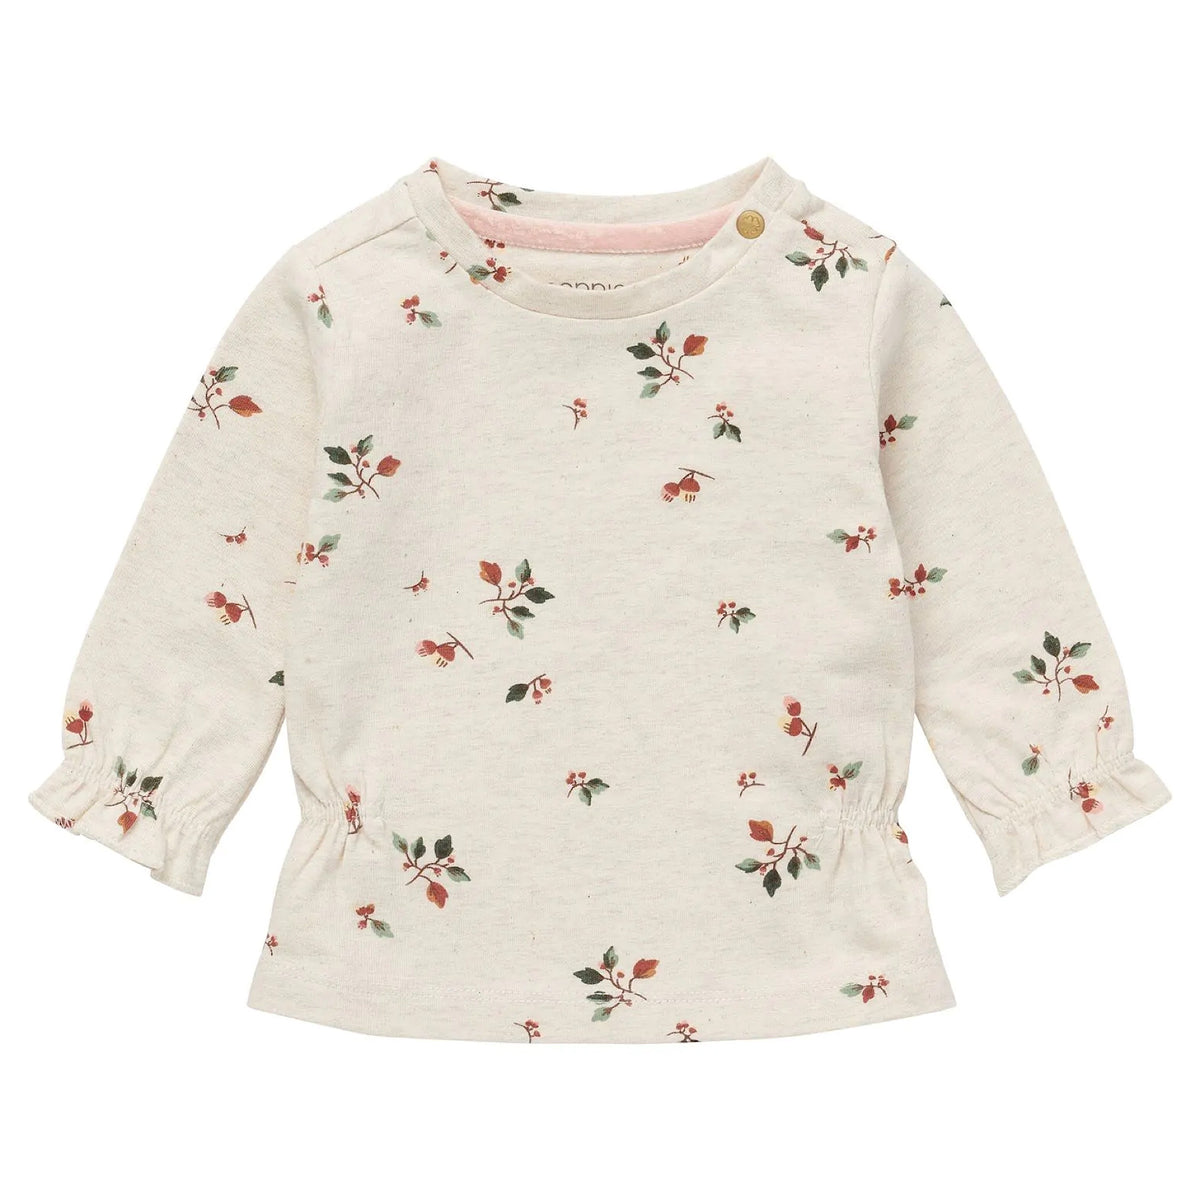 Winter Floral Top with Gathered Waist